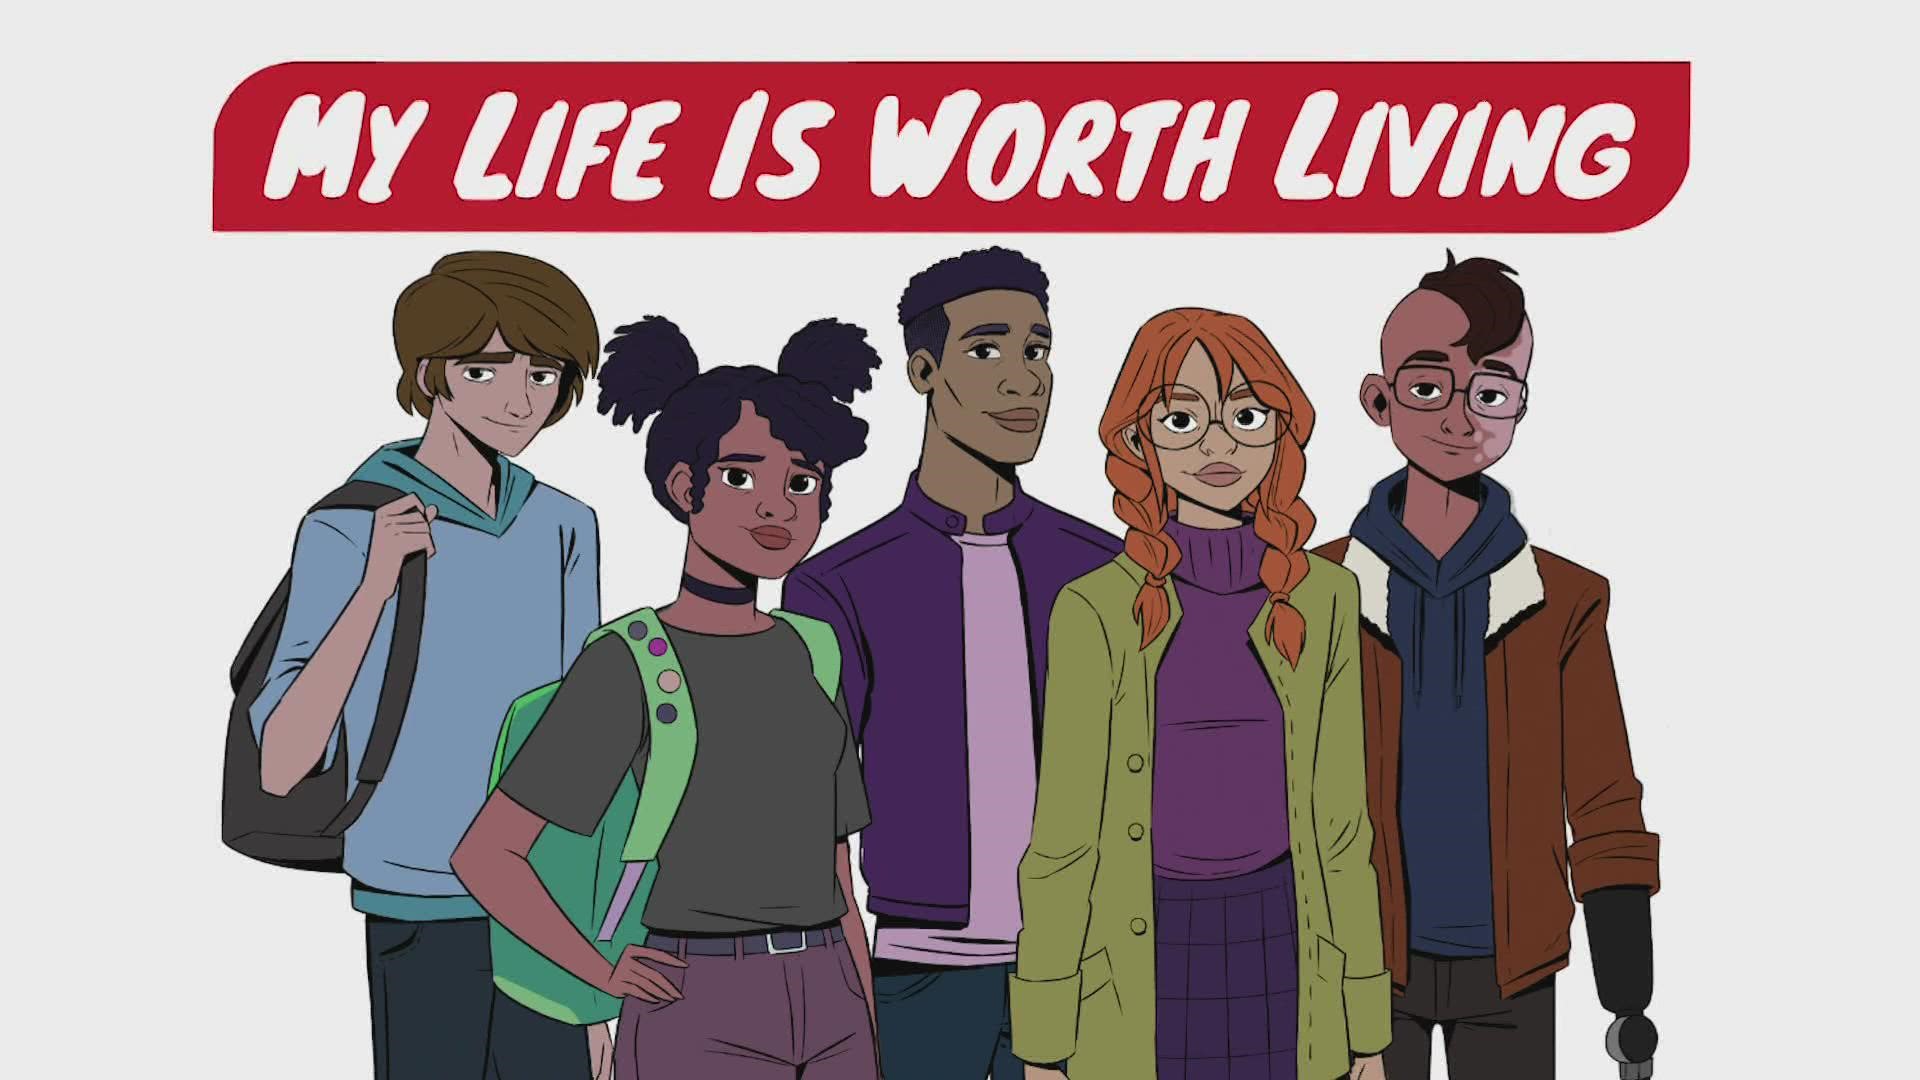 "My Life is Worth Living" is a new animated series from Terry Thoren, who also worked on shows like "Rugrats" and "The Wild Thornberrys."